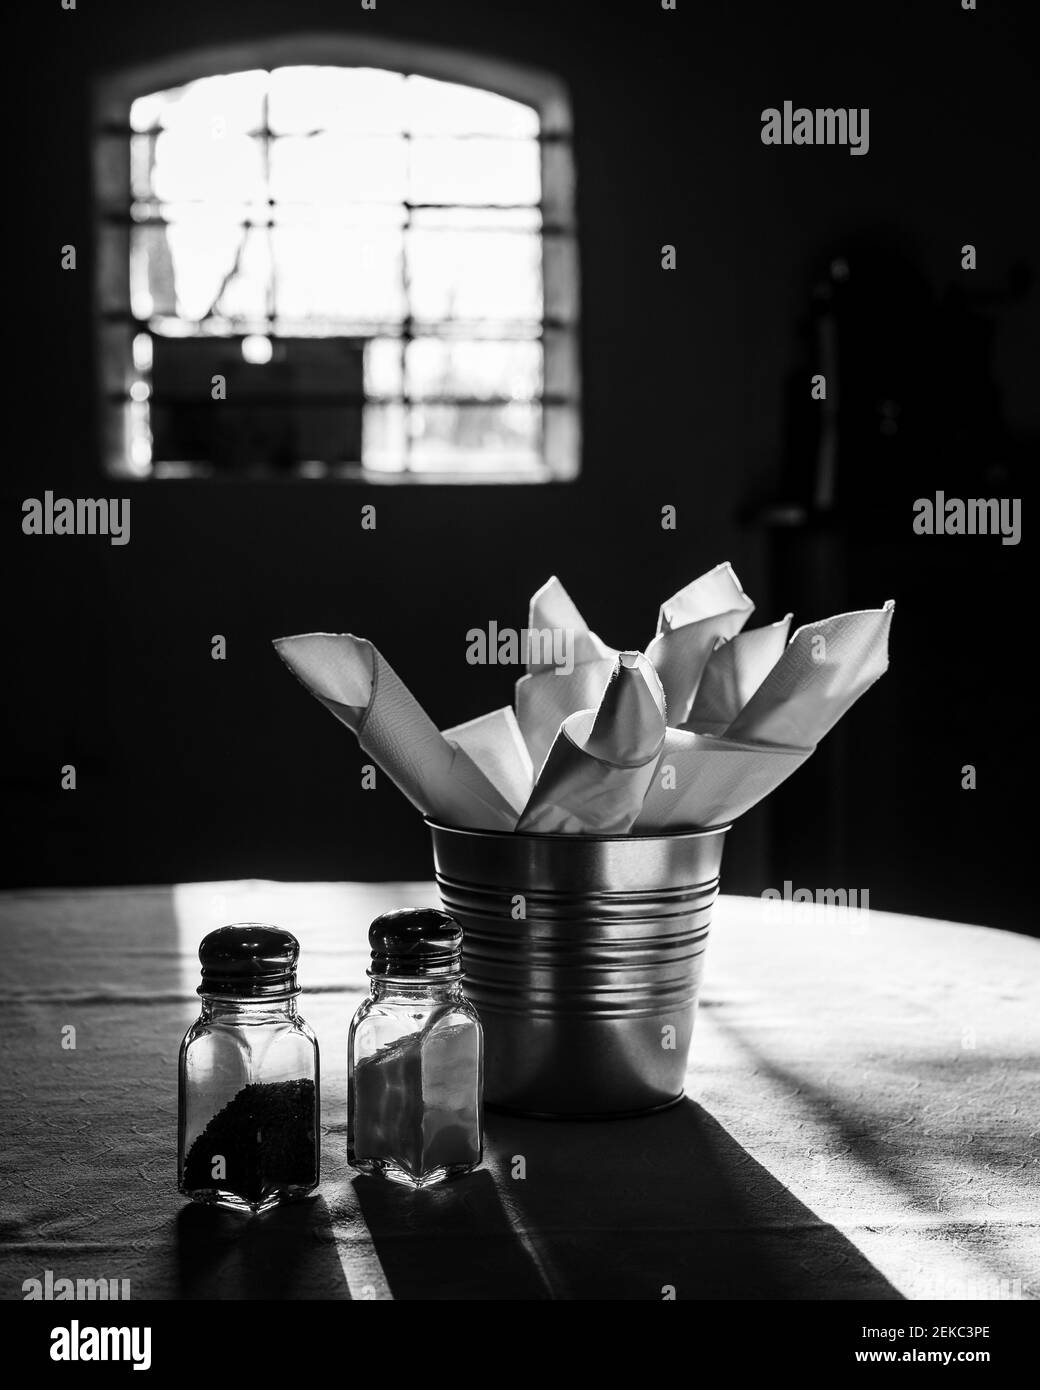 A pair of salt and pepper and shakers, napkins on table Stock Photo